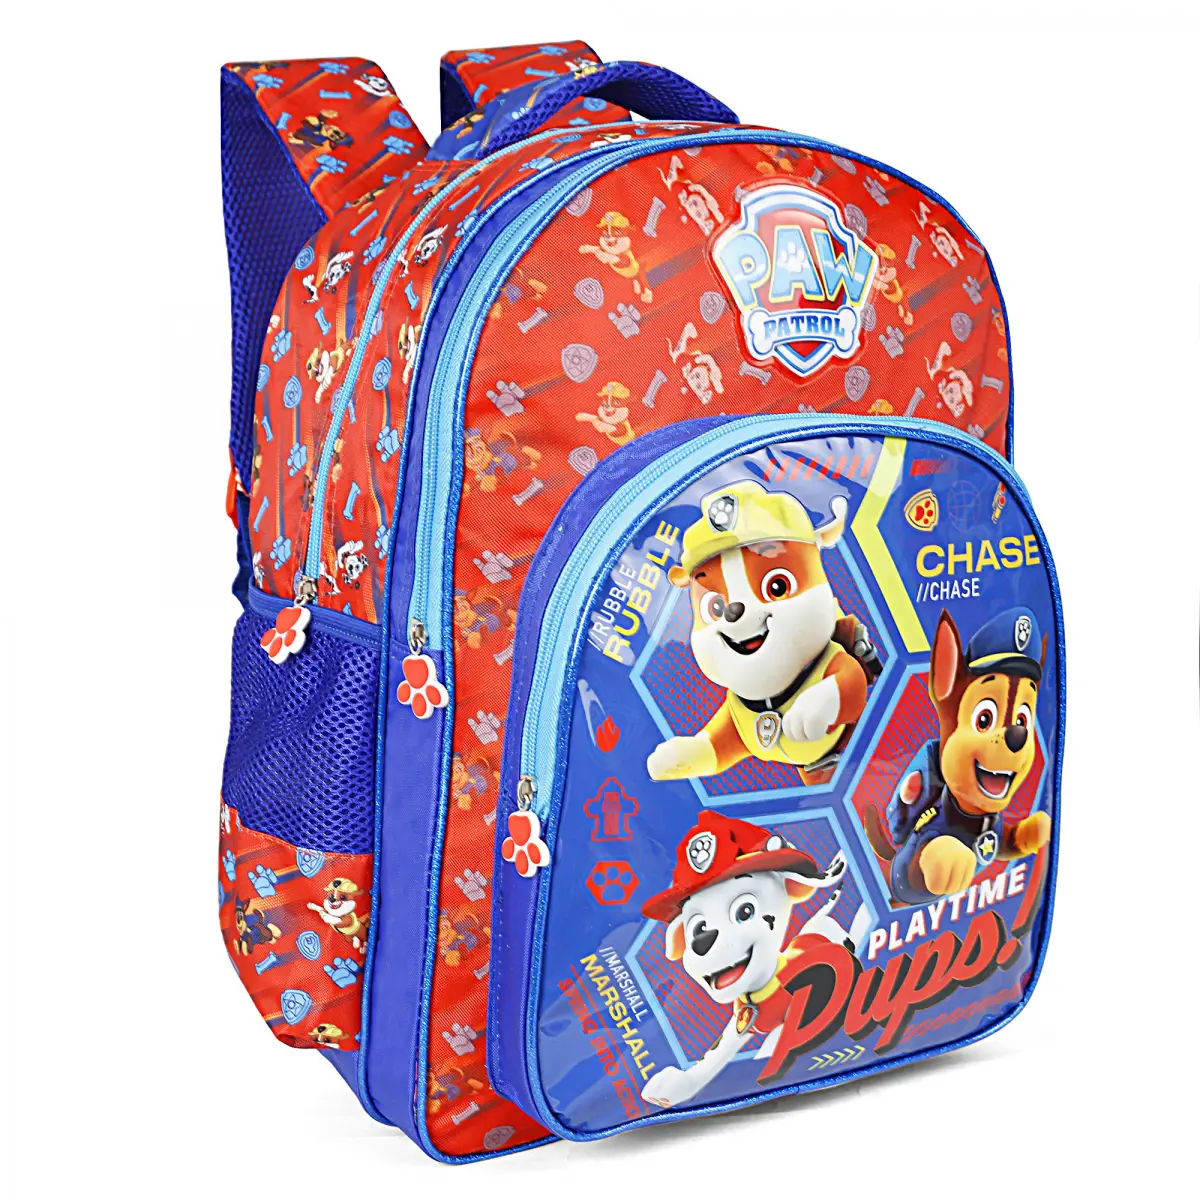 Paw Patrol Pups Bag Pack, 16Inches, Multicolour